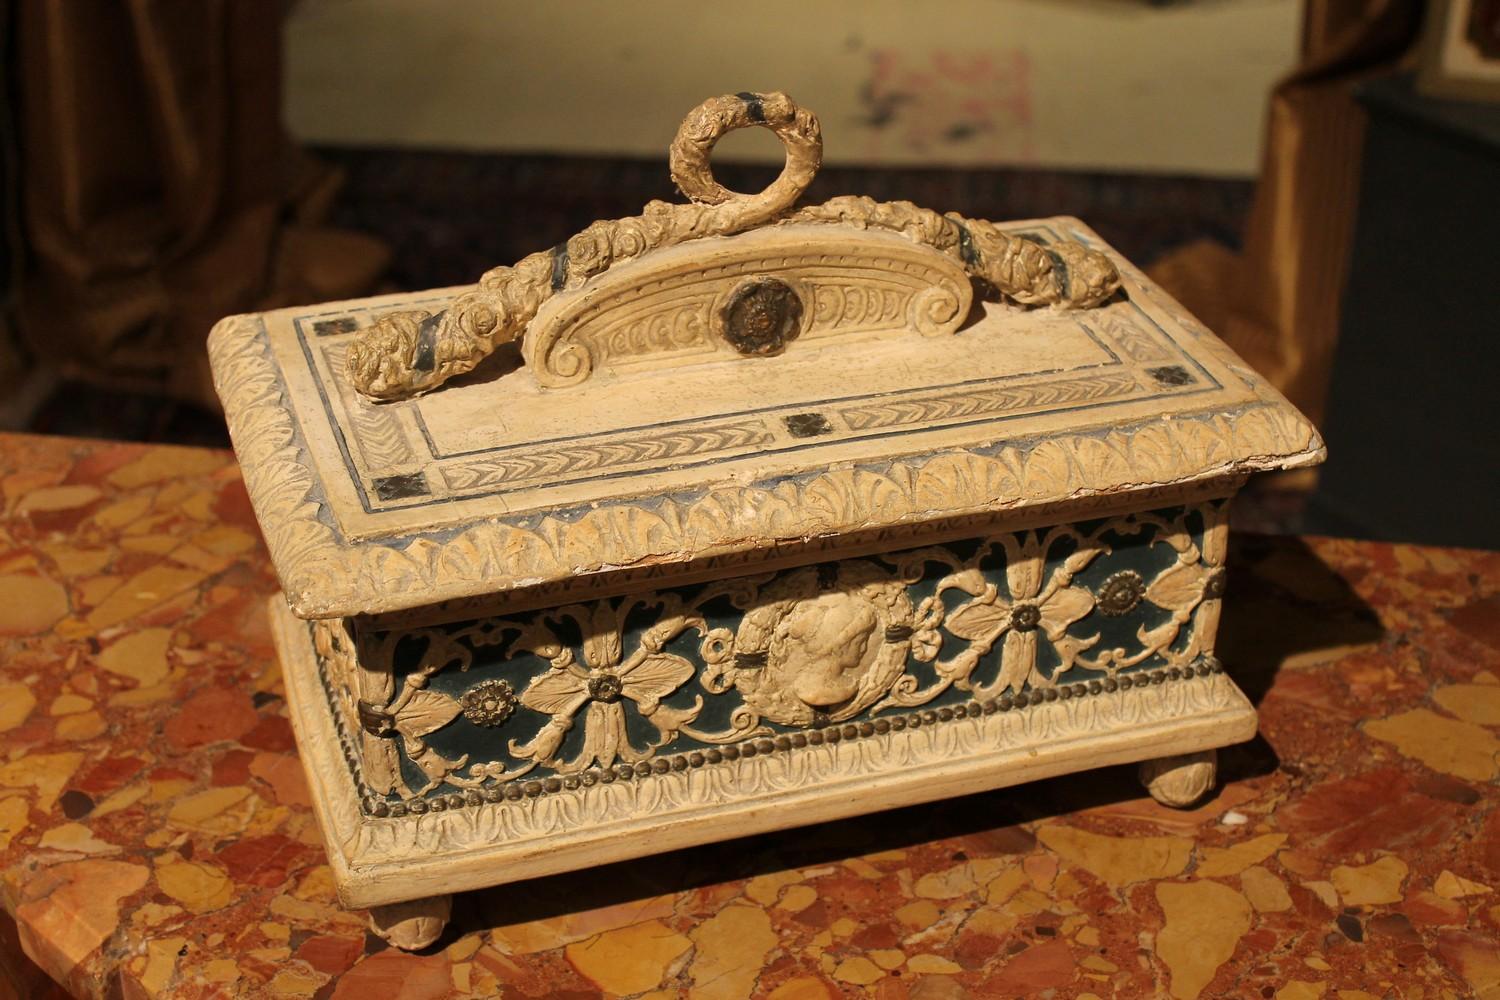 Italian 19th Century Renaissance Style Wood Lacquer and Painted Gesso Lidded Box For Sale 10